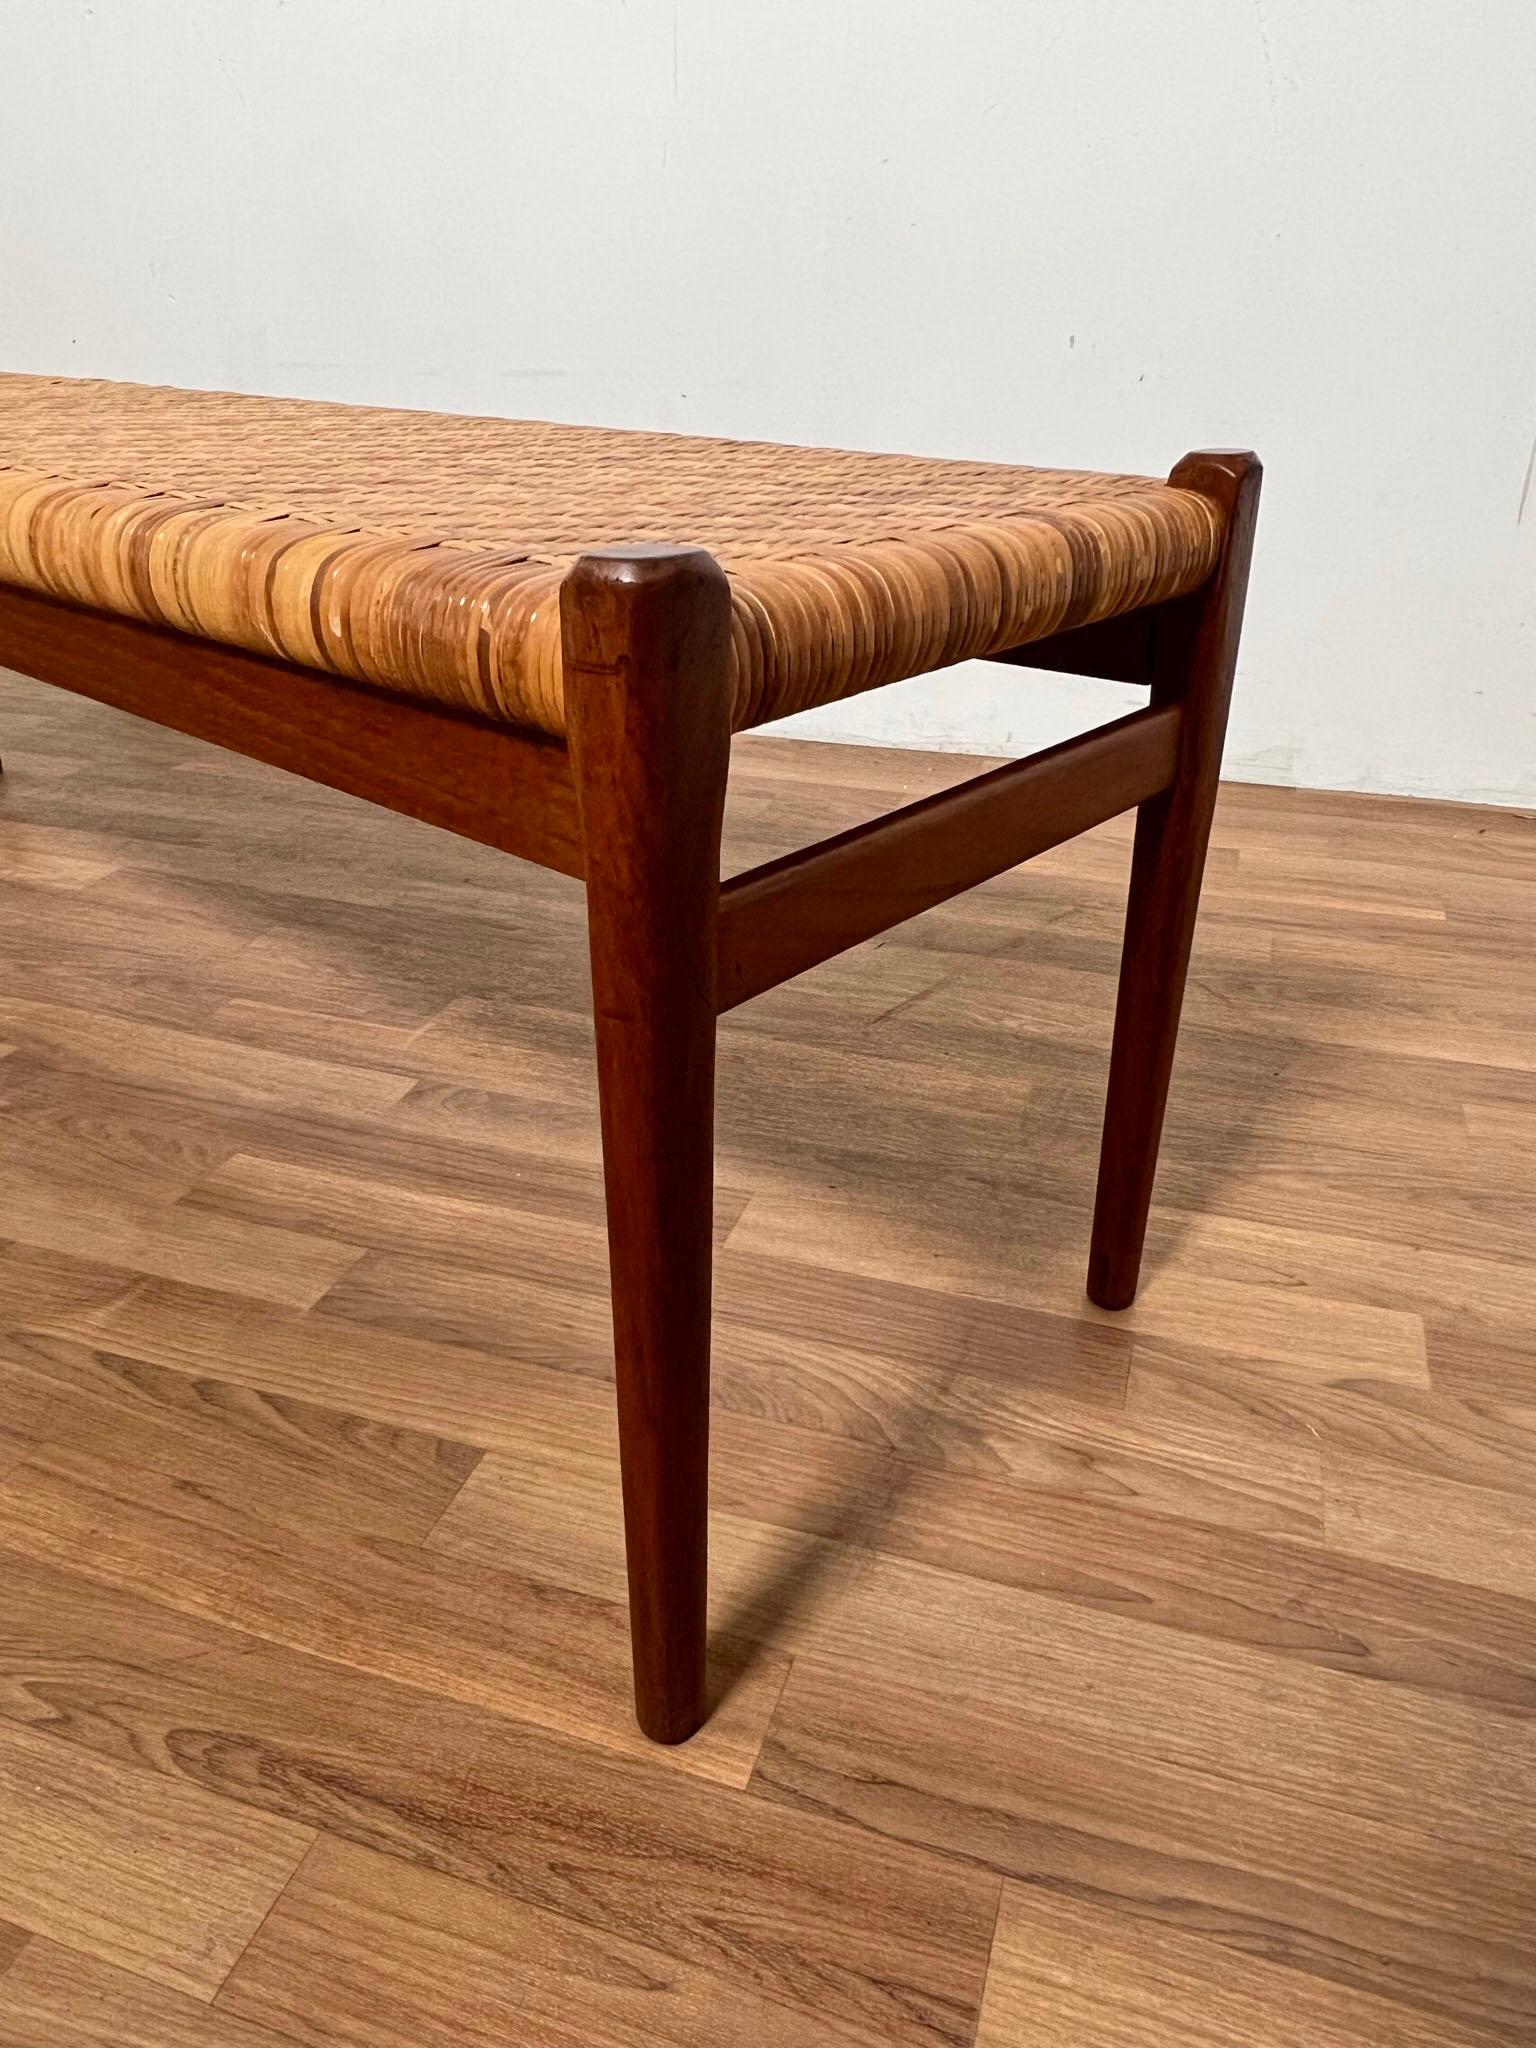 Mid-20th Century Niels Moller for J.L. Mollers Danish Teak and Cane Bench, circa 1960s